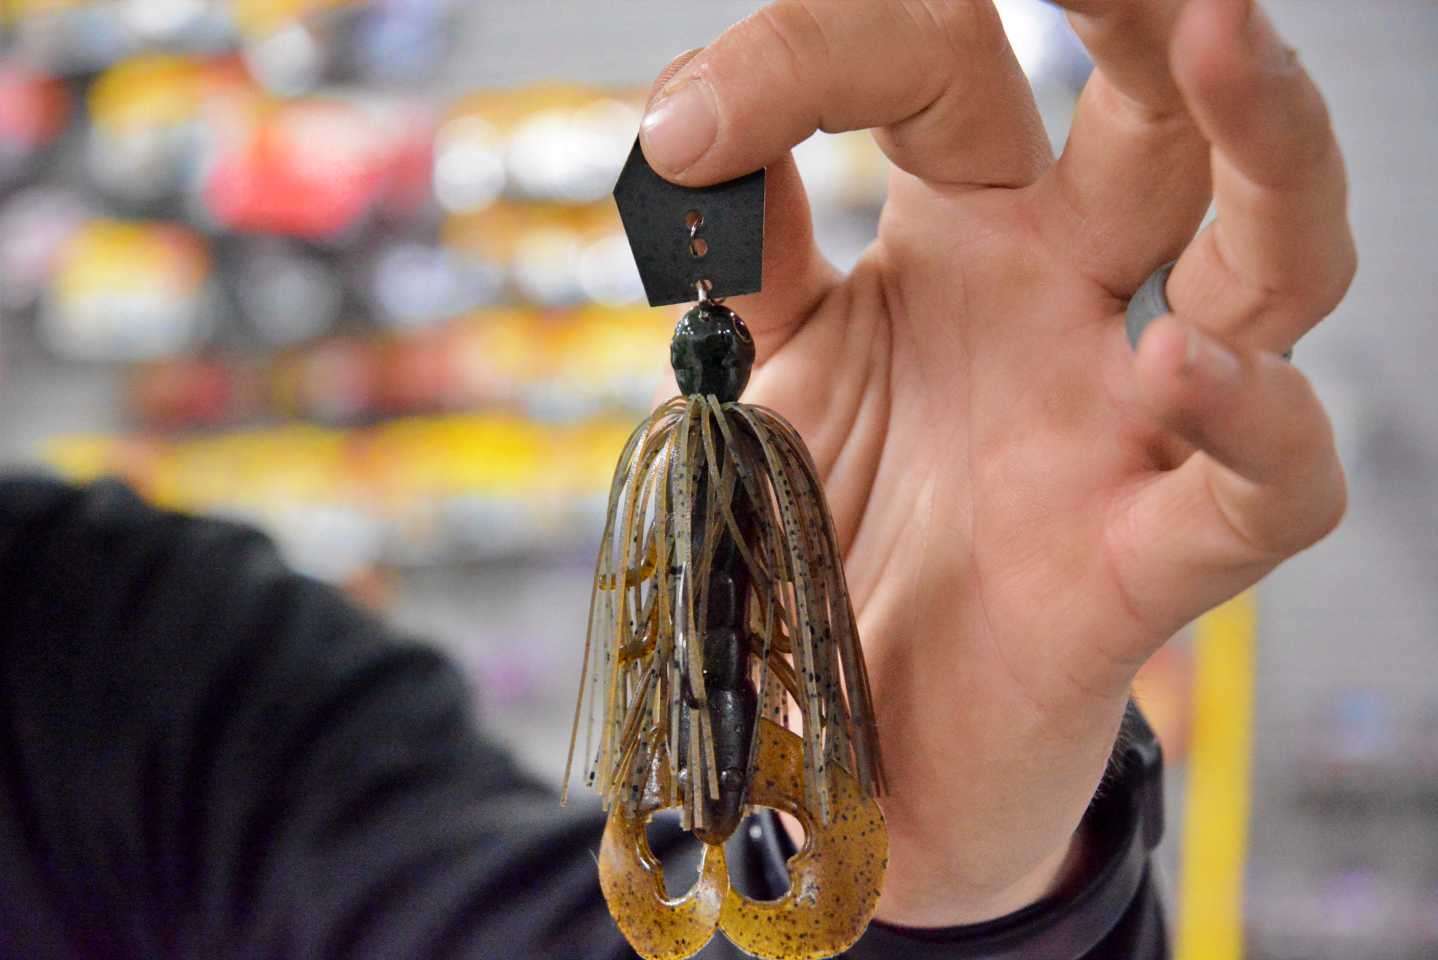 Atkins uses a Berkley PowerBait Chigger Bug for added strike appeal. âIt resembles a crawfish, takes out some of the kick and tones down the wider wobble,â he said. 